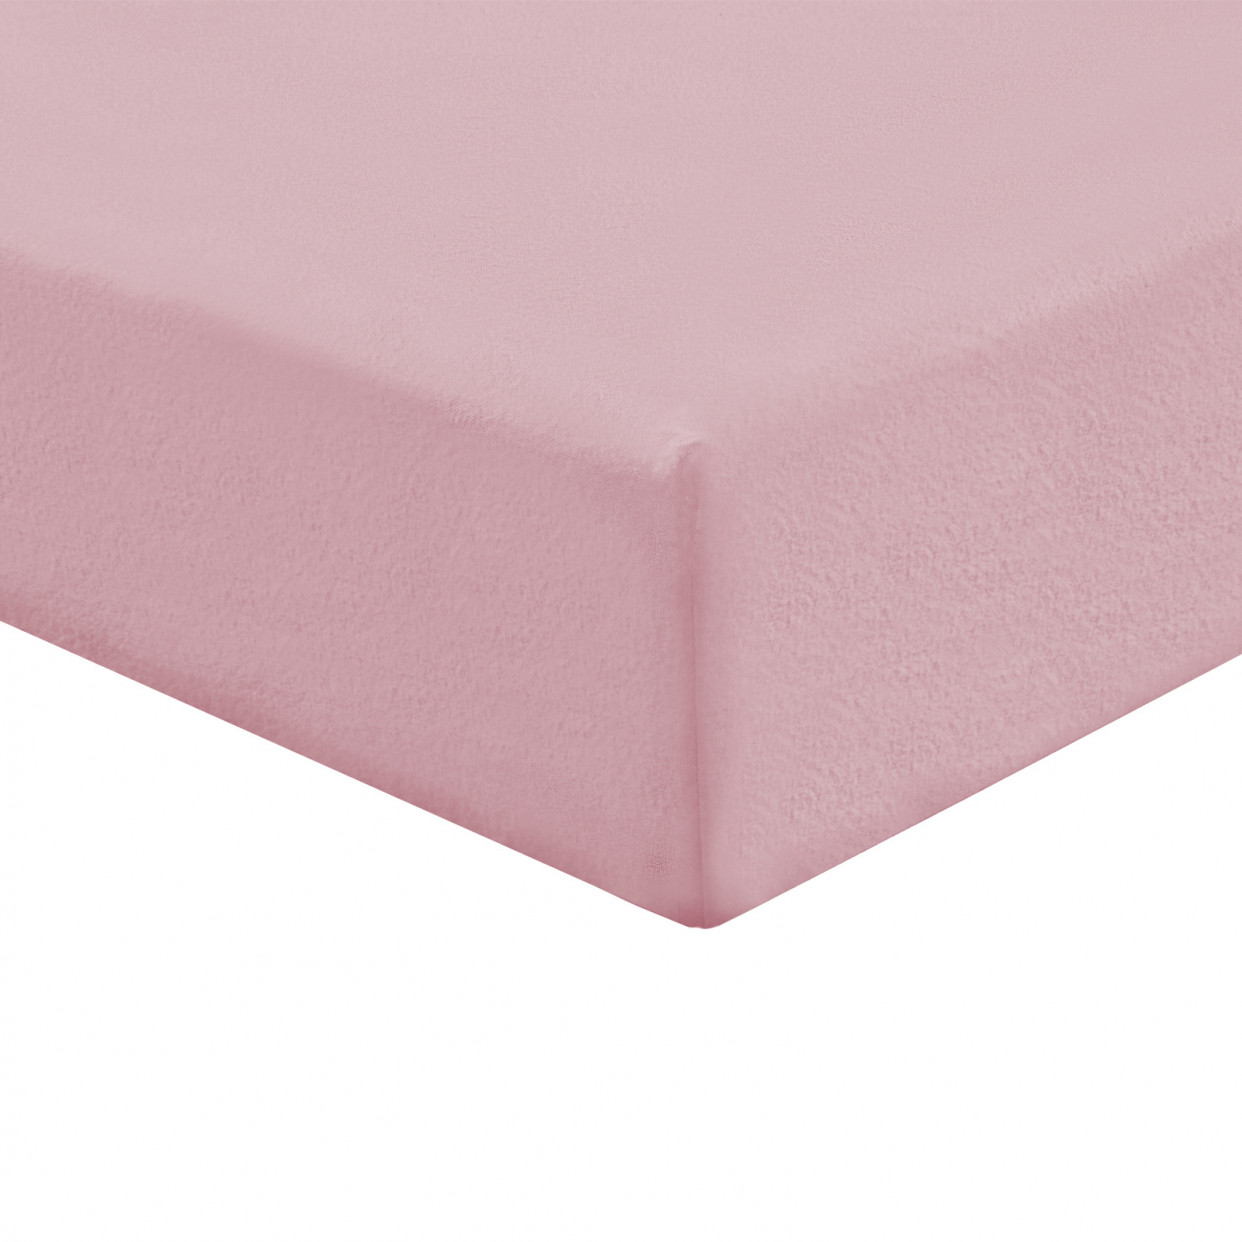 Highams Brushed Cotton Fitted Bed Sheet - Blush Pink>